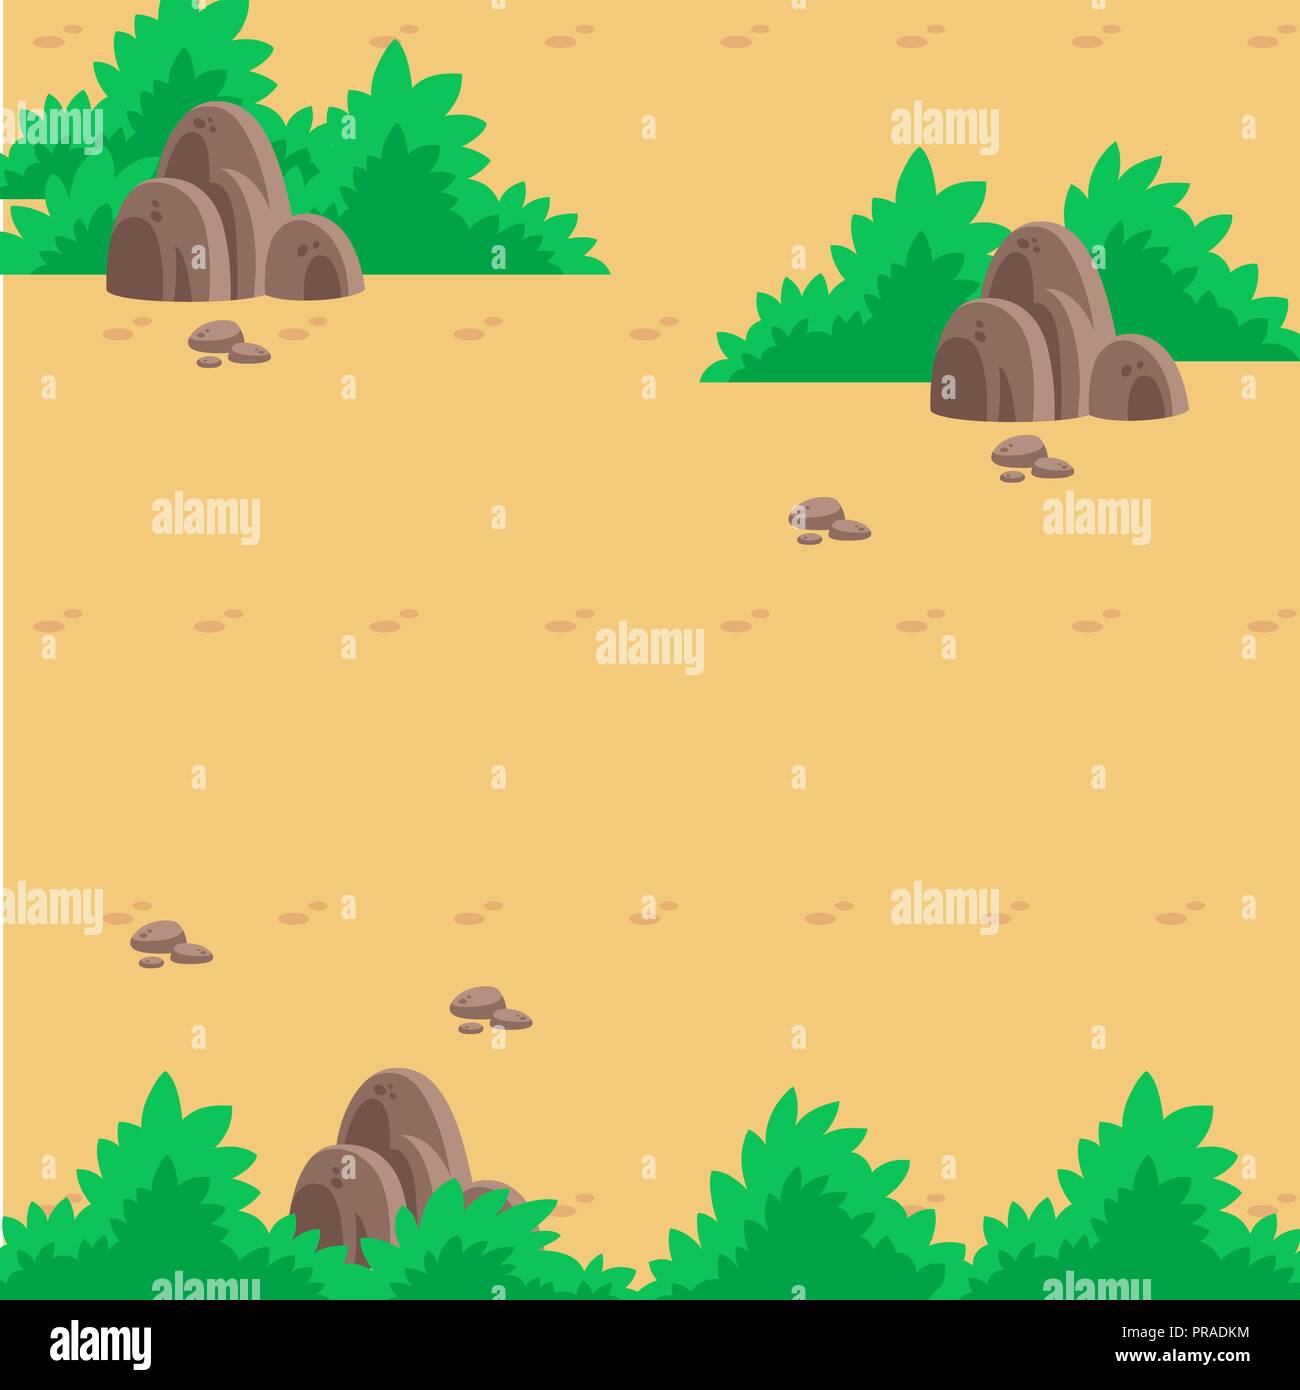 wasteland illustration. Nice for infographic background Stock Vector